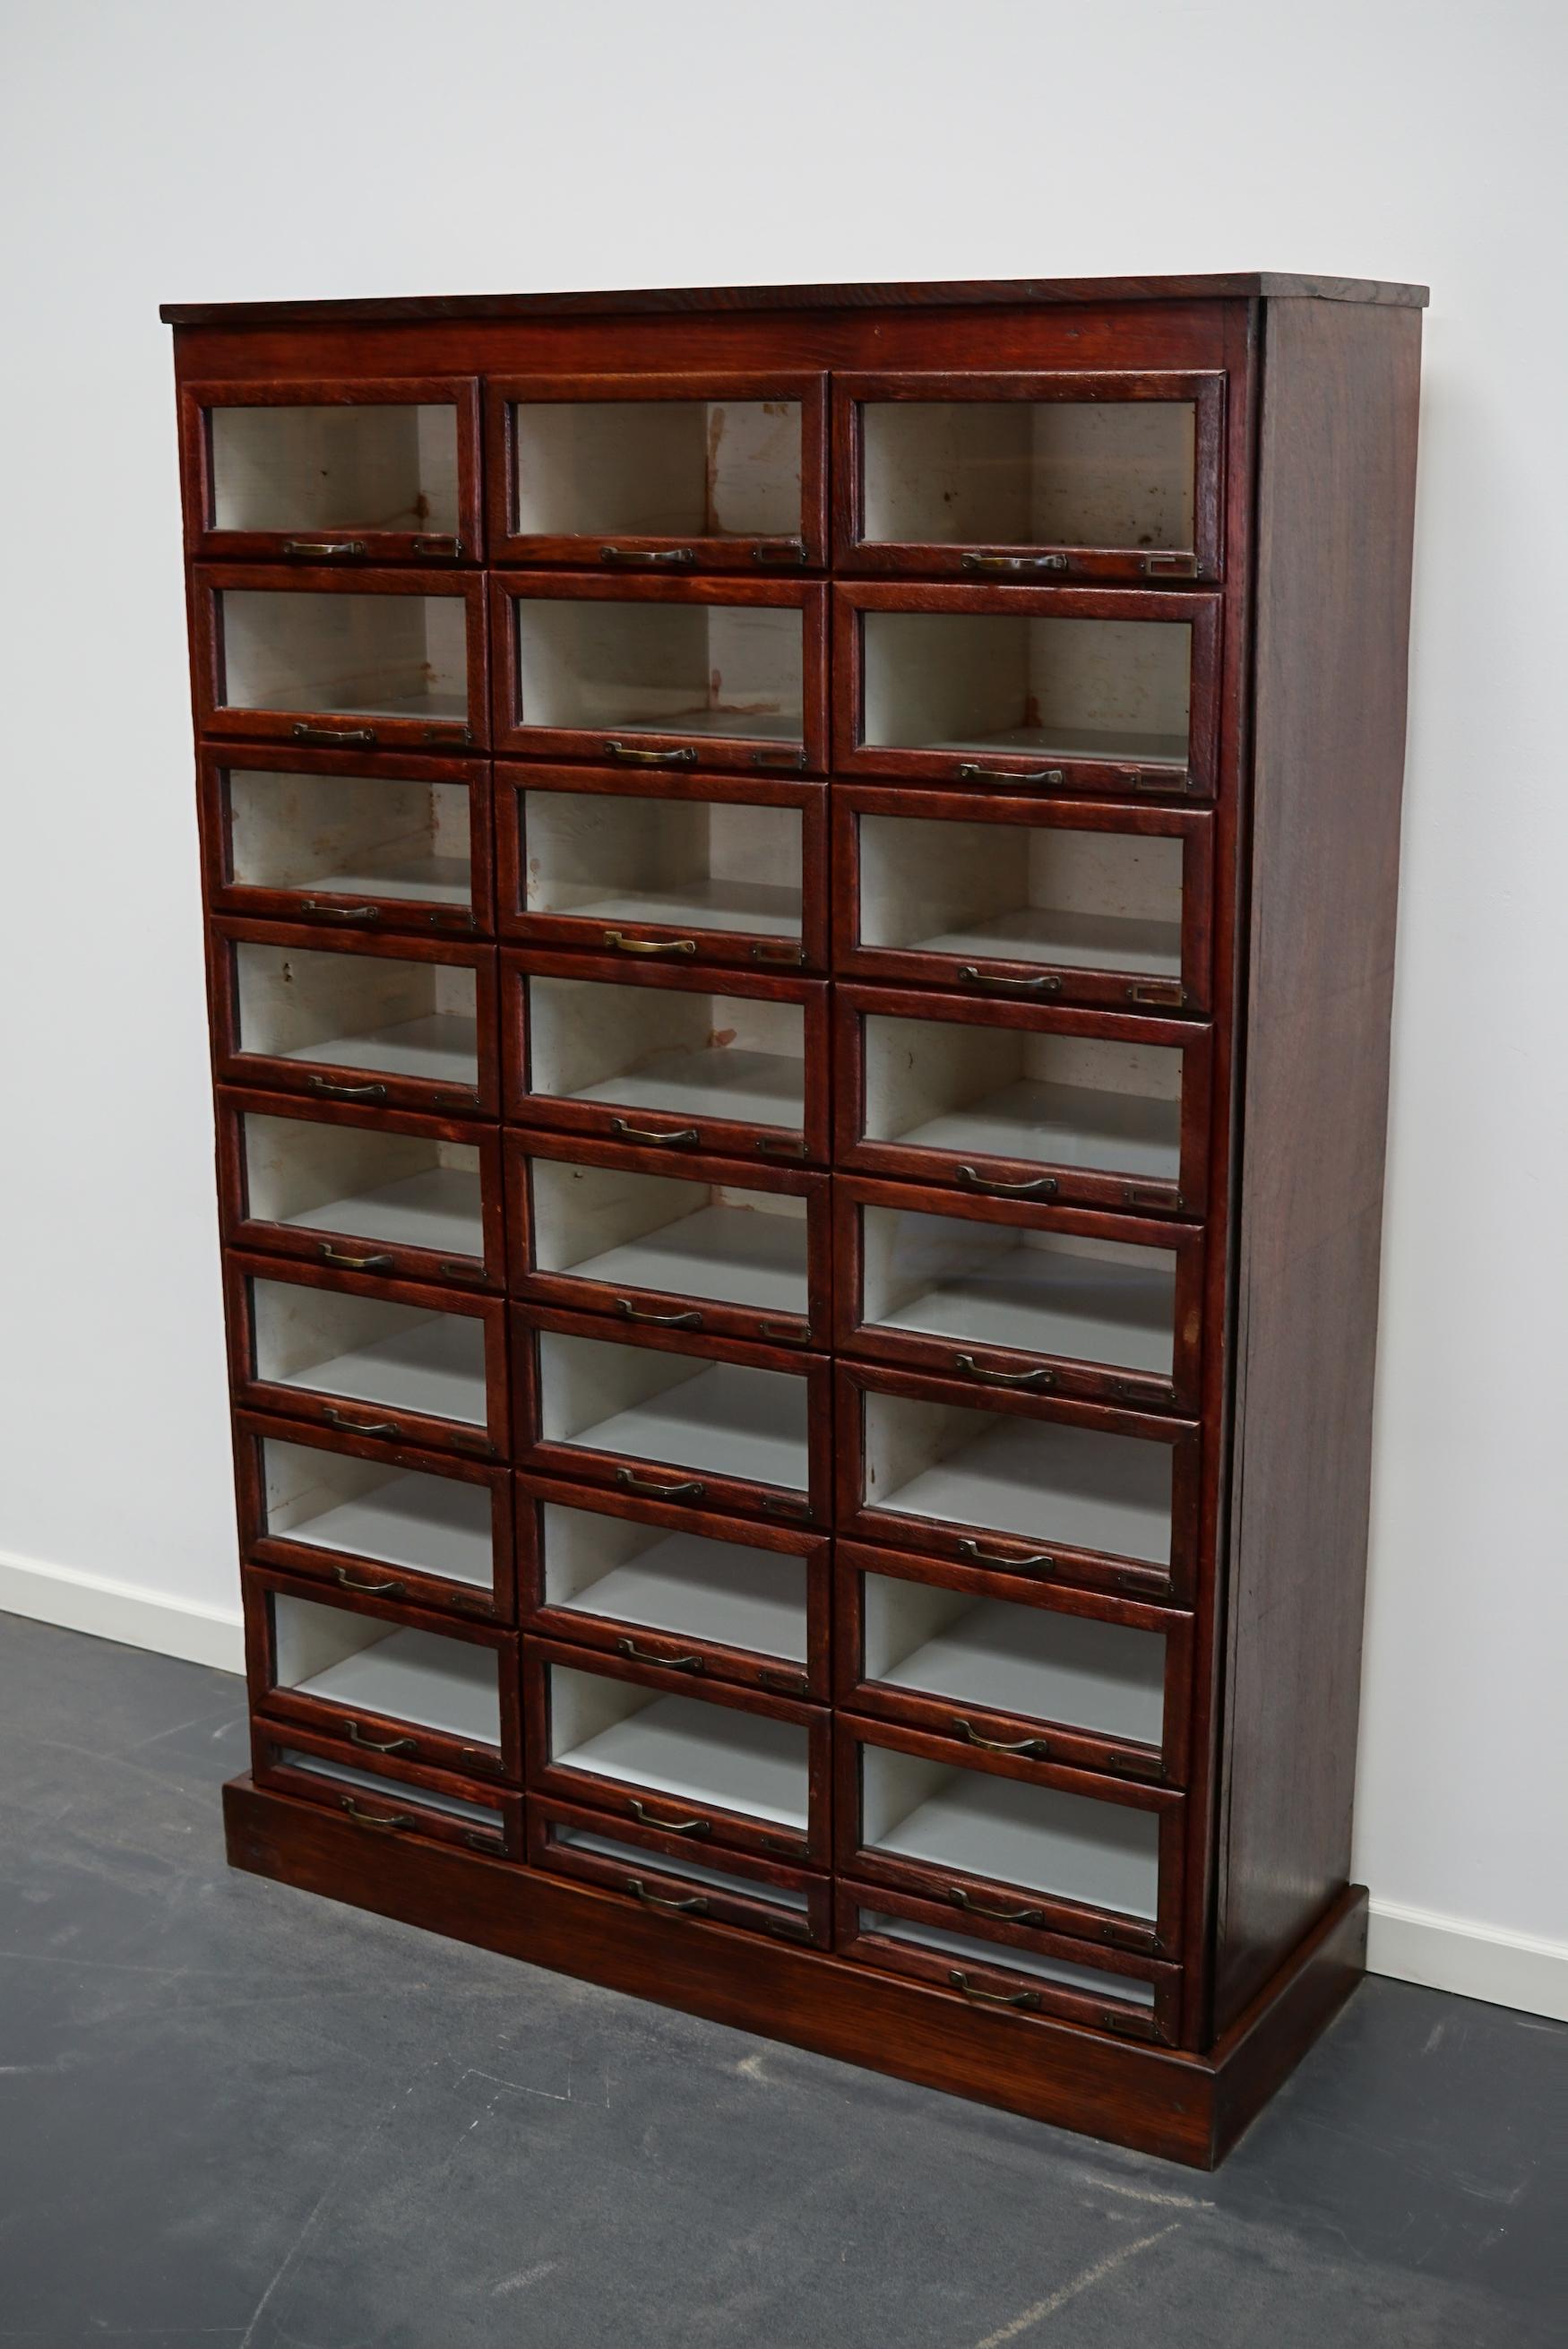 This haberdashery cabinet was produced during the 1930s in the Netherlands. This piece features 27 paper covered drawers in mahogany stained oak with glass fronts, brass handles and name card holders. It was originally used in a shop for sewing